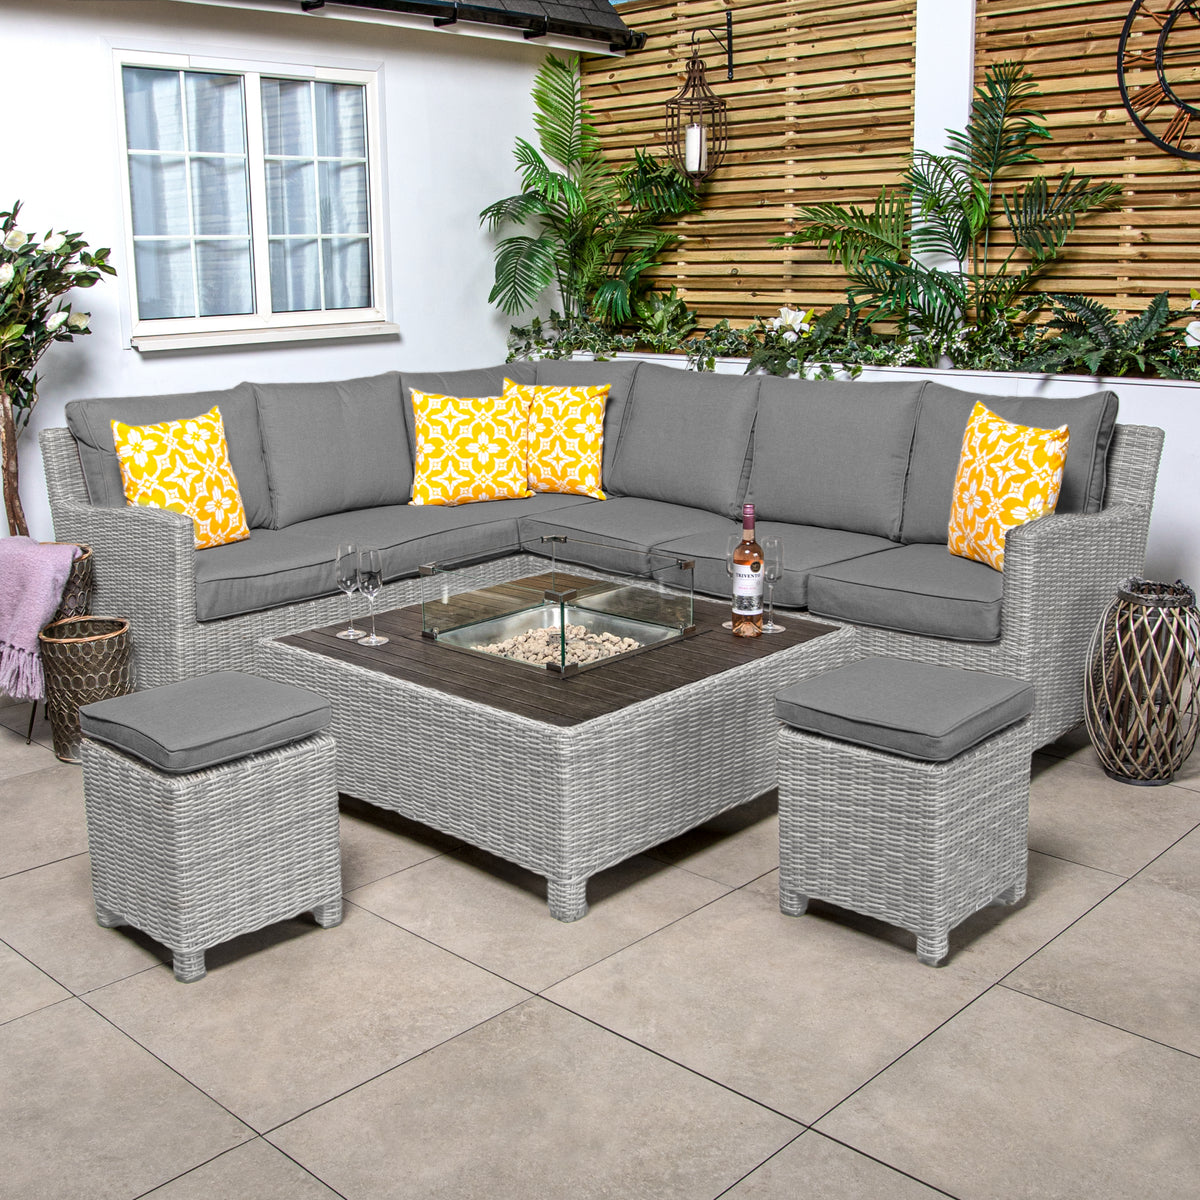 Kettler Palma Corner Right Hand White Wash Sofa Set with Low Fire Pit Table